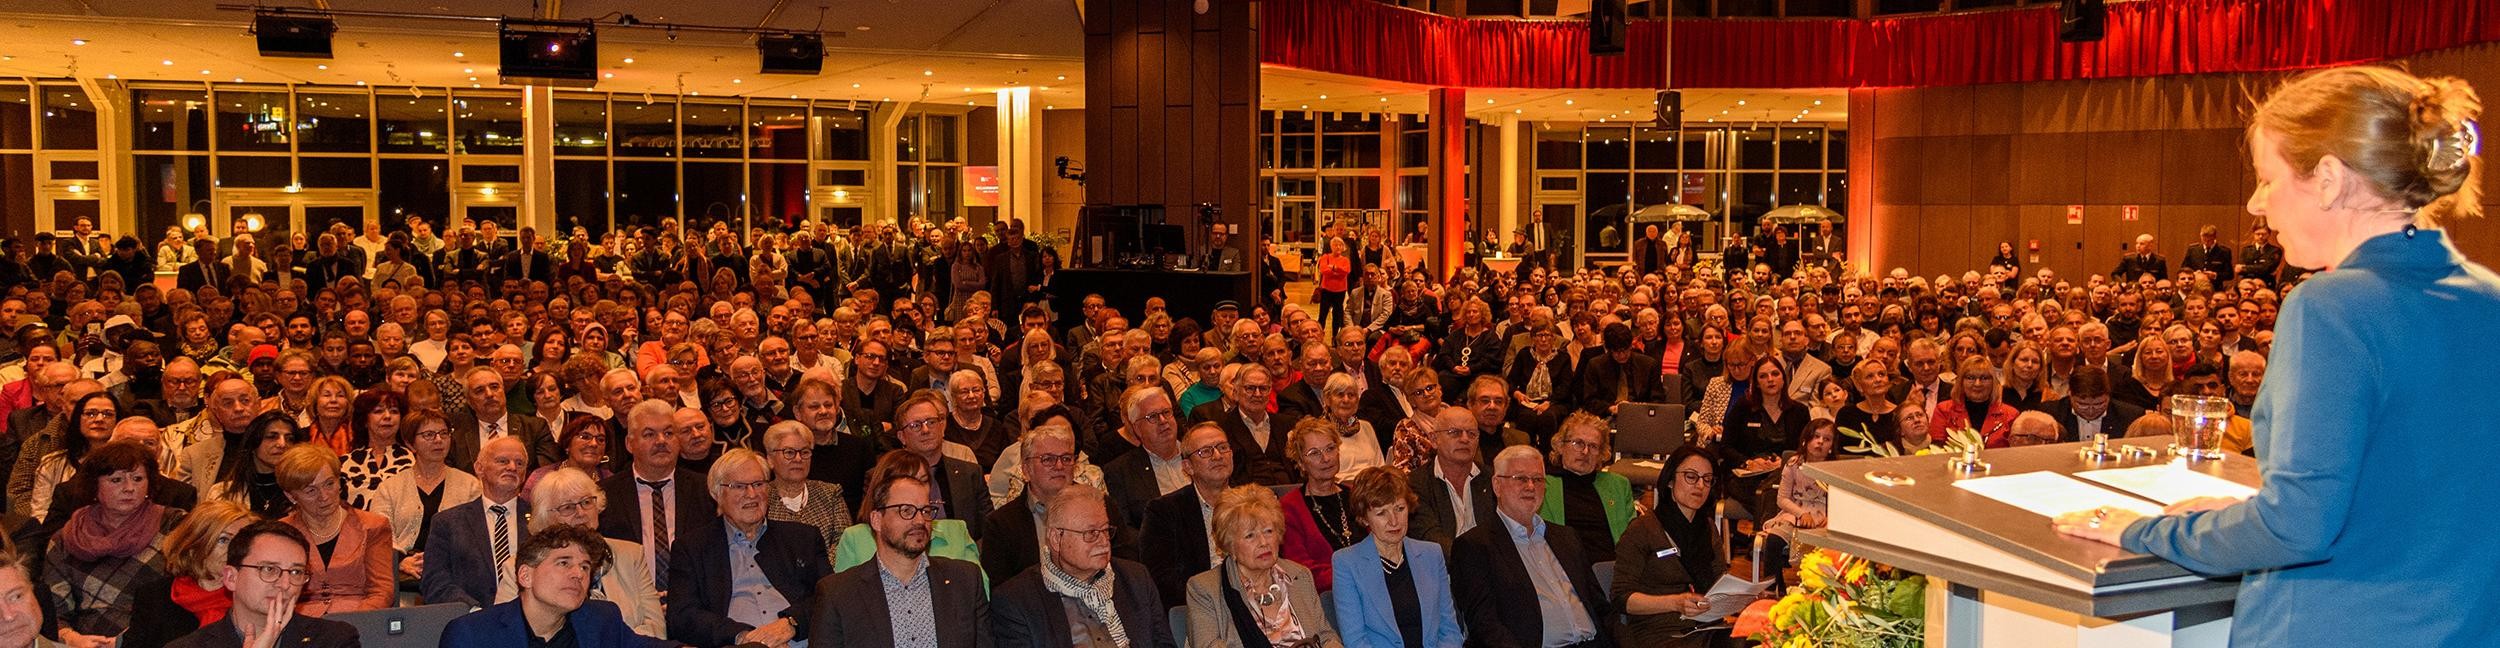 Audience and stage with Mayor Müller at the New Year's reception in the Badner Halle